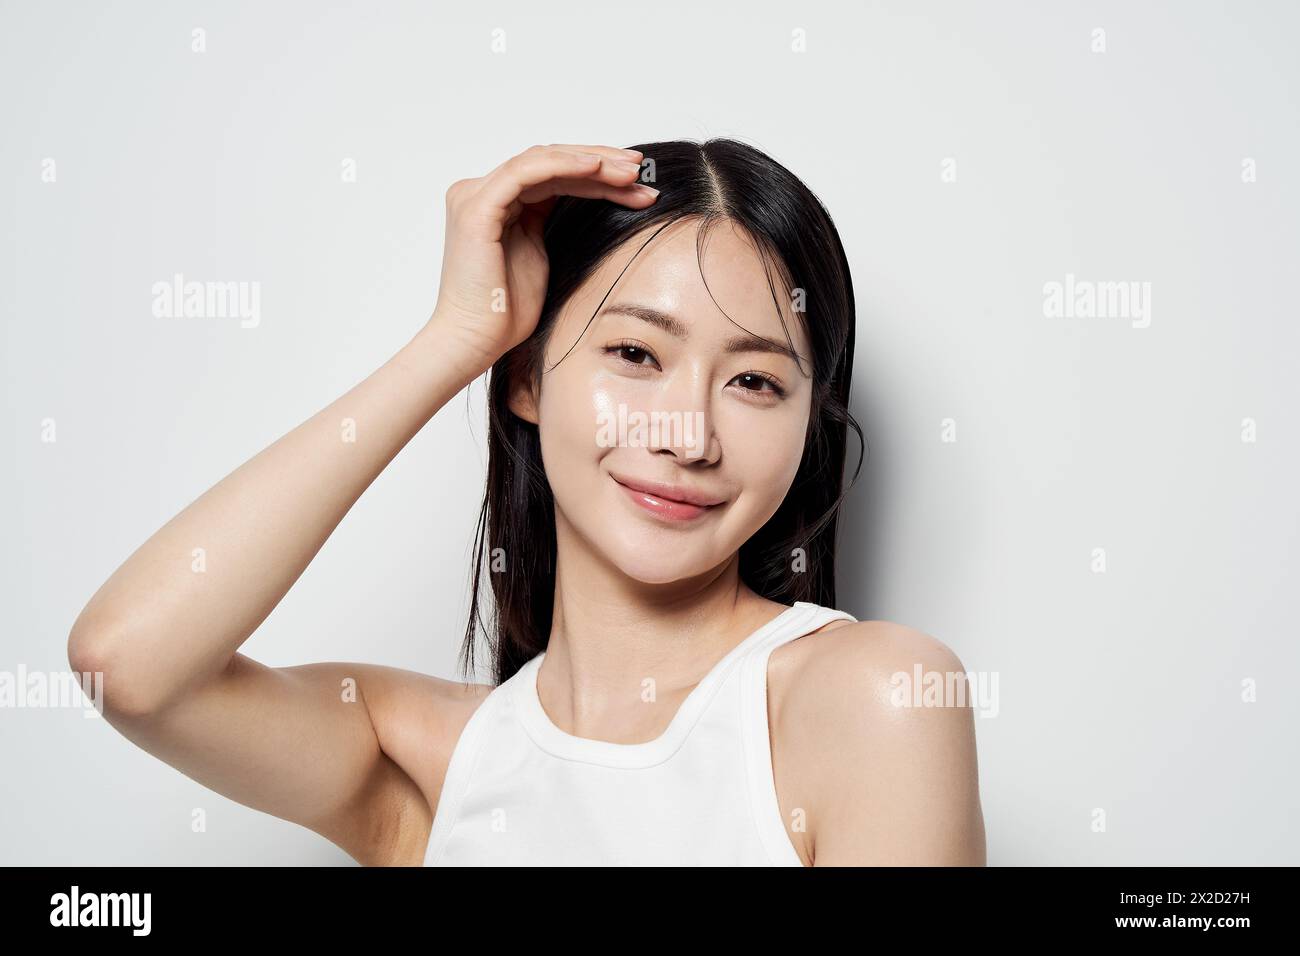 Asian woman posing with her hand on her head against a white background Stock Photo